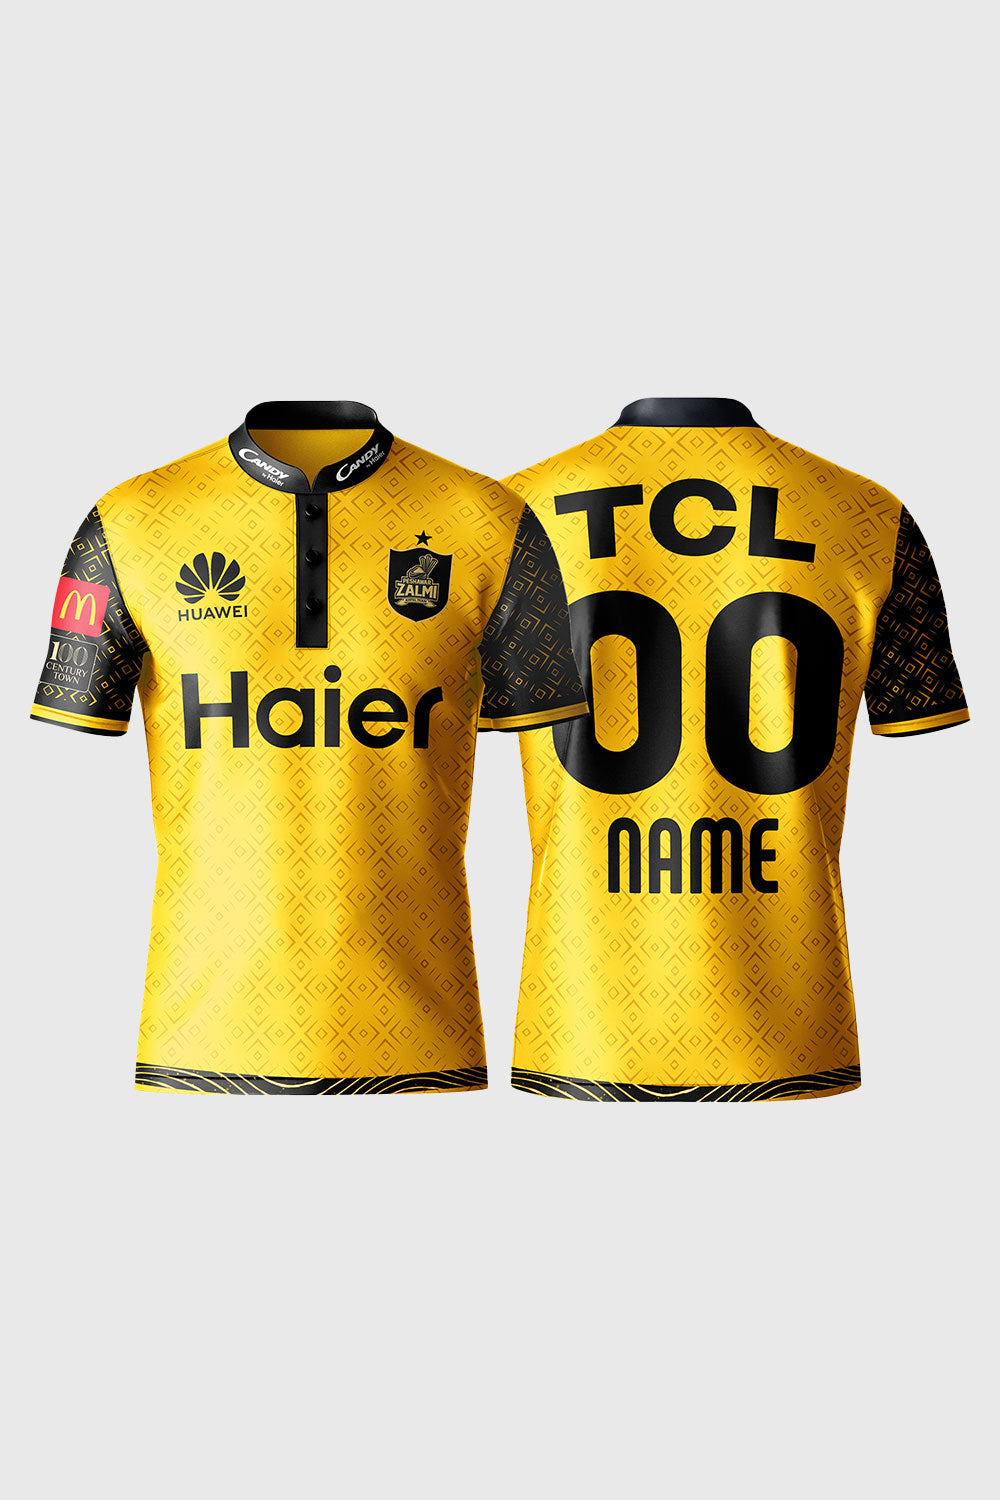 Customized Official PSL 8 Premium Match Day's Playing Jersey | Zalmi Official Kit by Zalmi Store